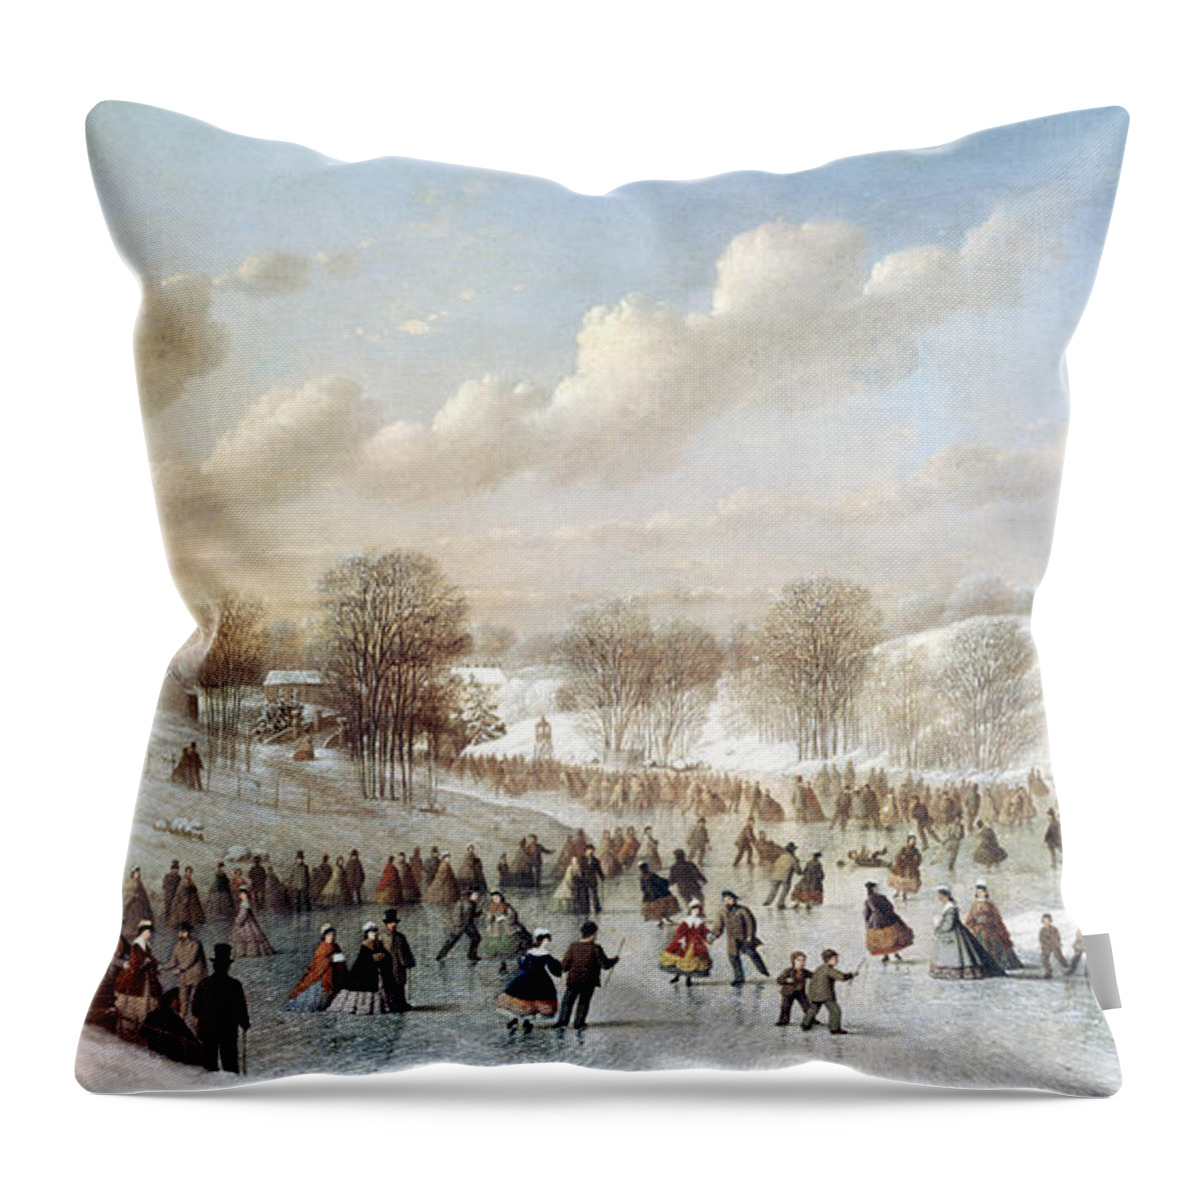 1865 Throw Pillow featuring the painting Ice Skating, 1865 by Granger